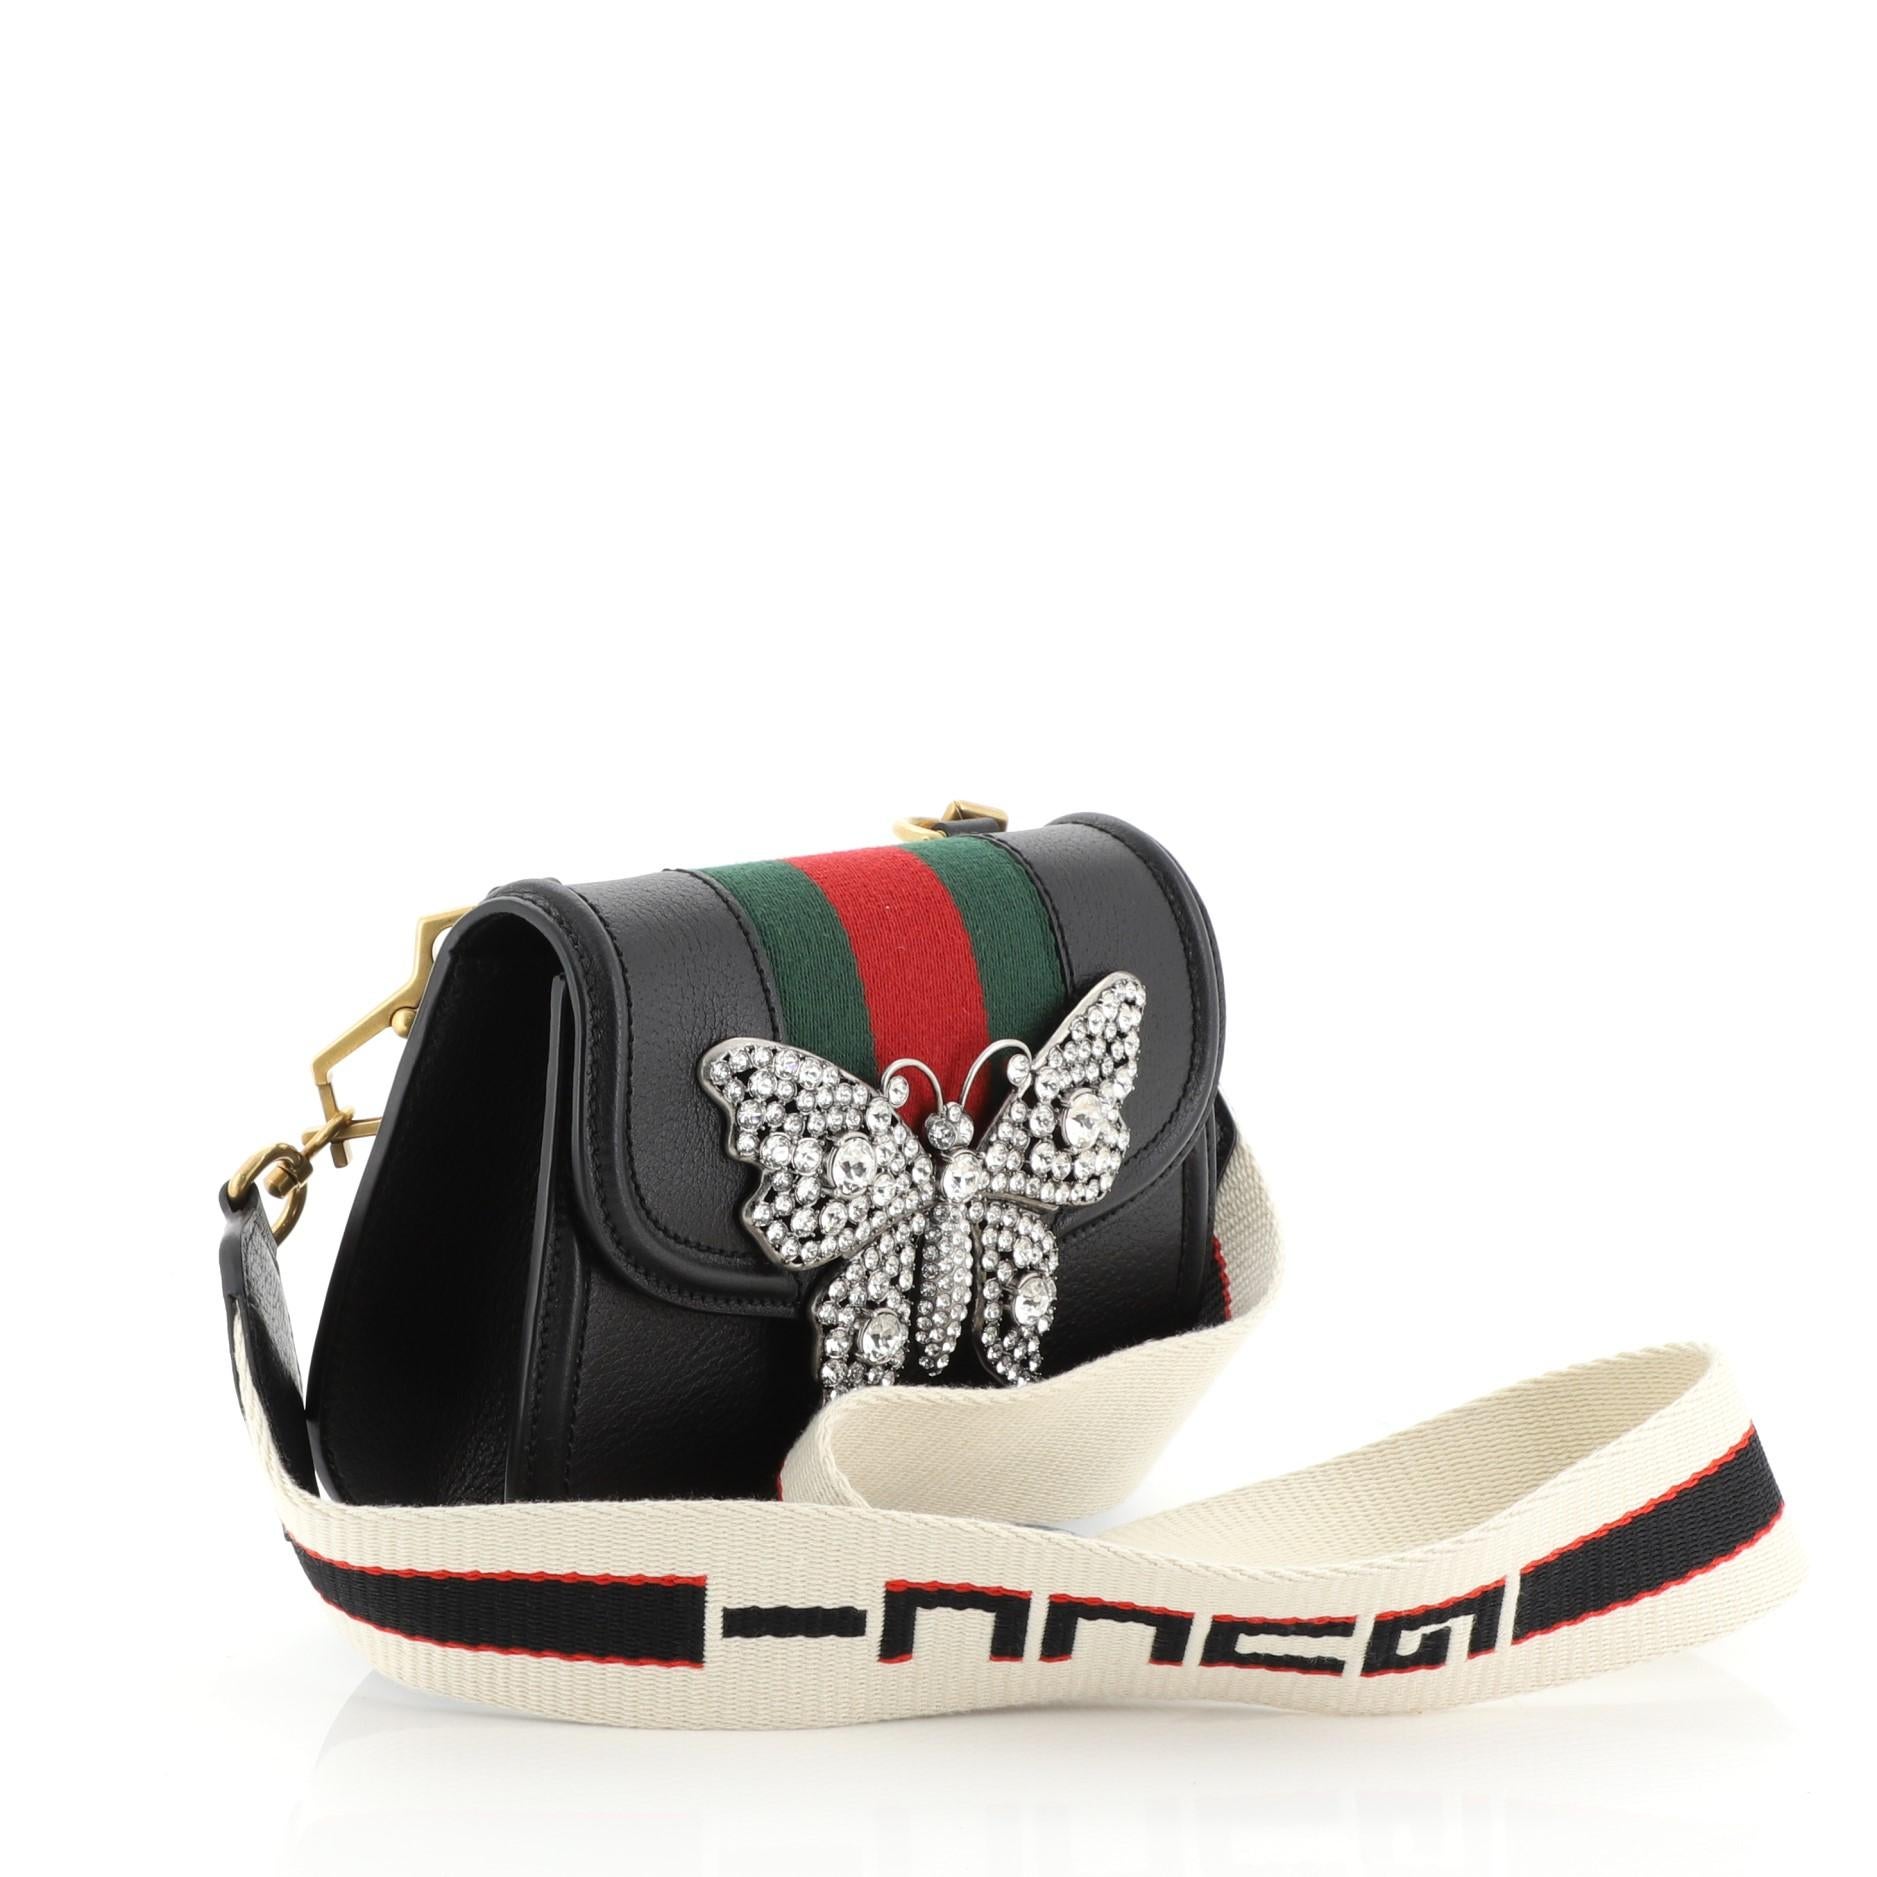 This Gucci Totem Shoulder Bag Leather Small, crafted in black leather, features a detachable Gucci jacquard stripe shoulder strap, front flap with enameled metal butterfly ornament, web detailing and gold and silver-tone hardware. Its magnetic